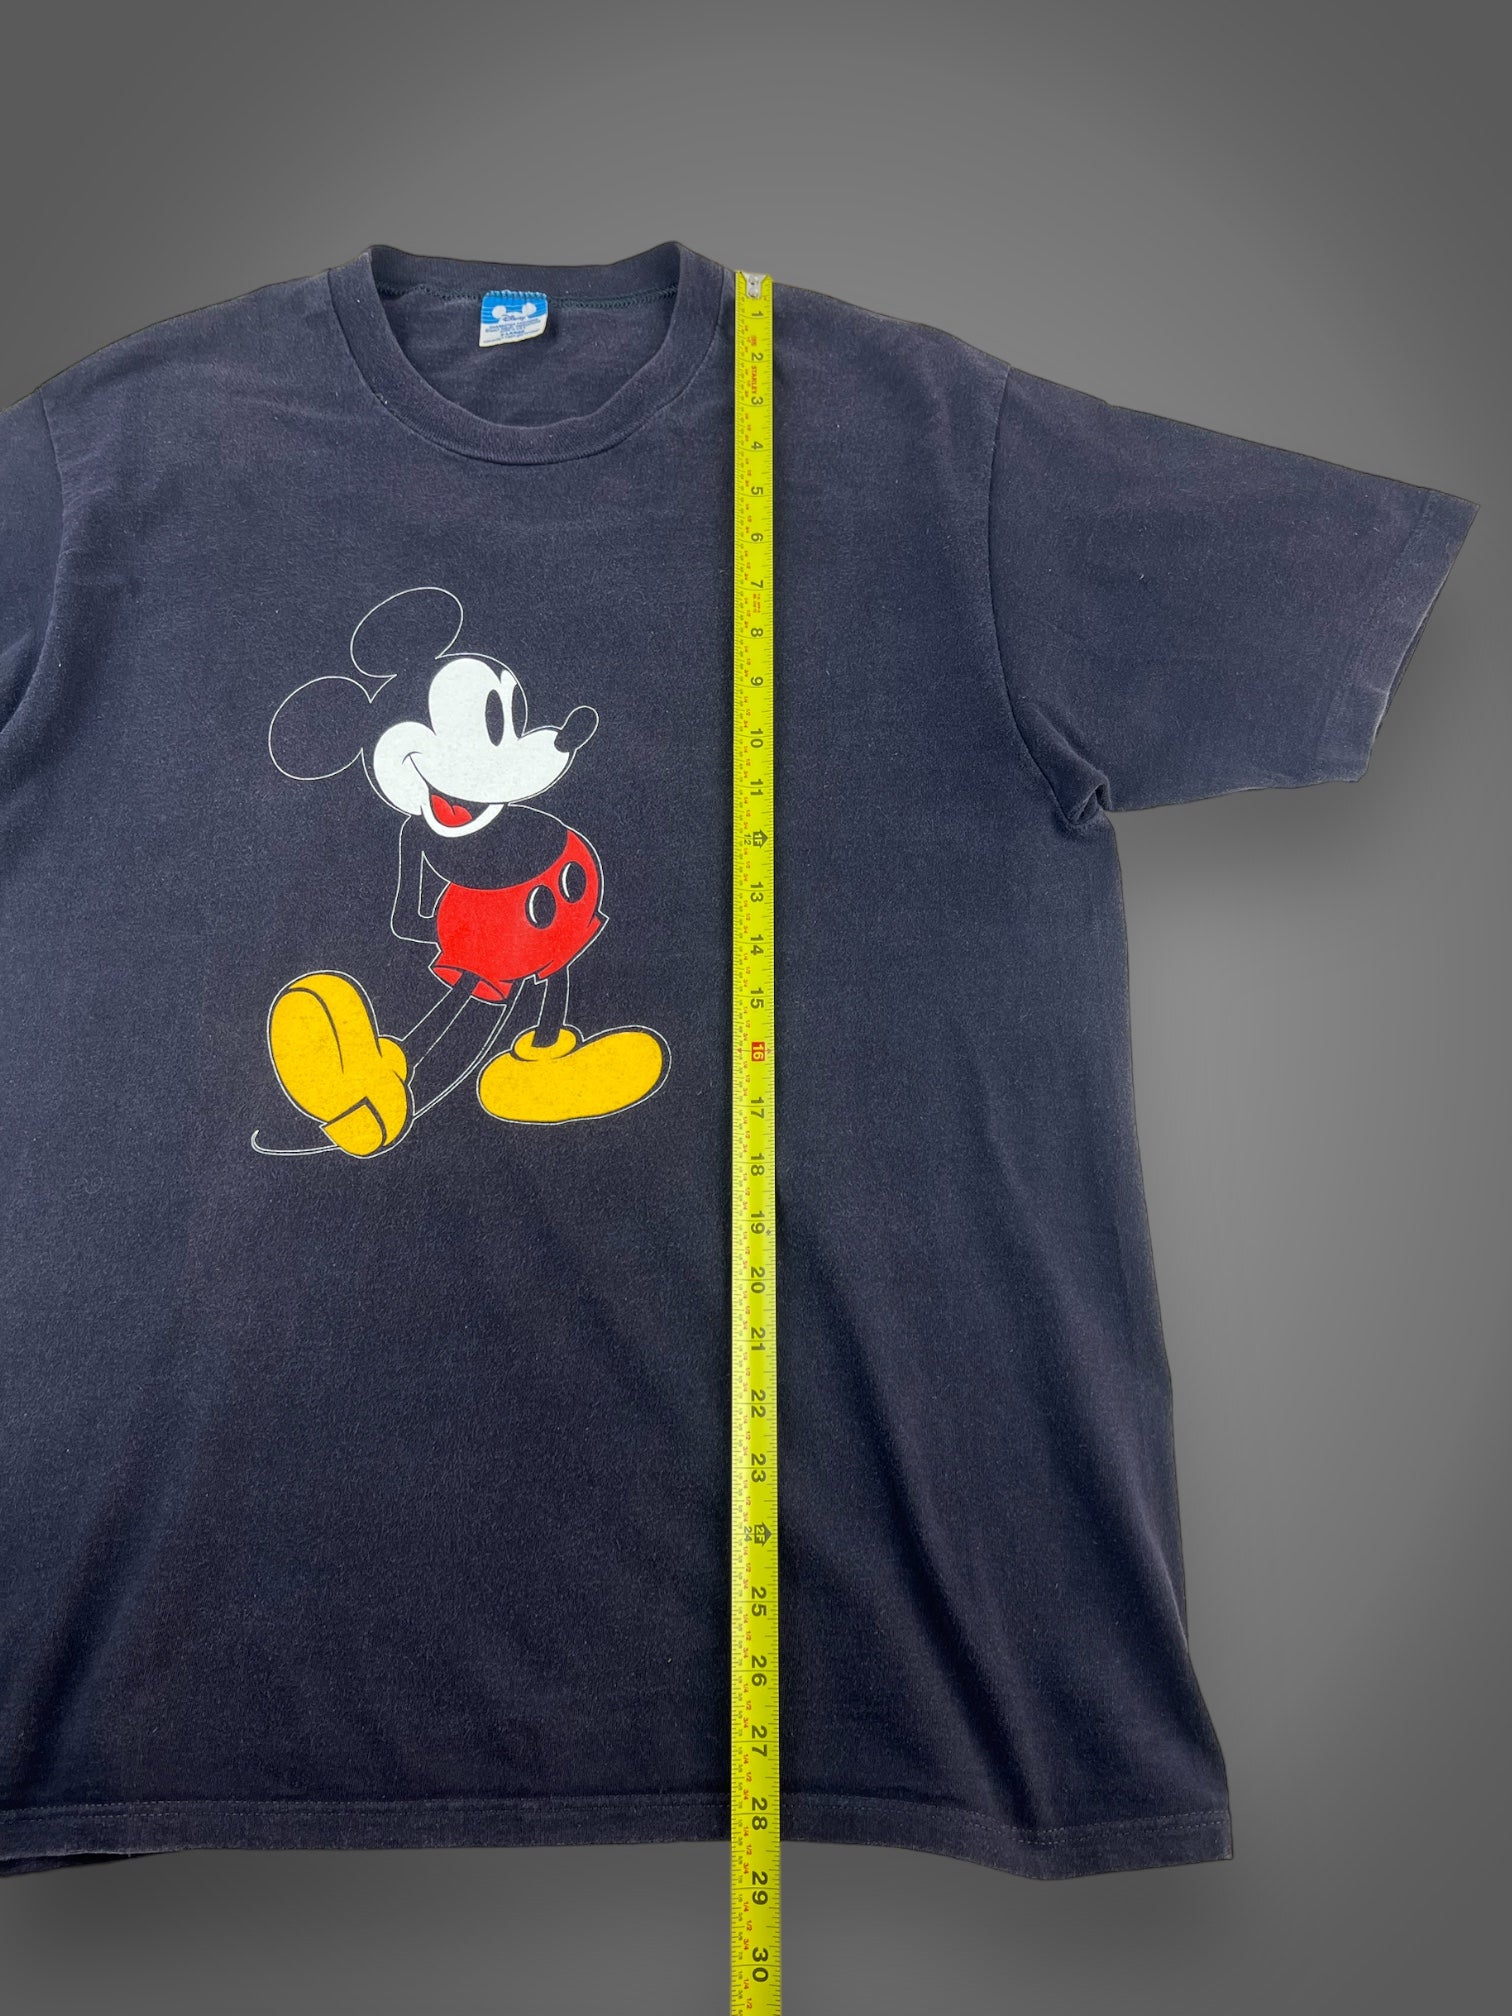 80s Mickey Mouse Disney t shirt fits L